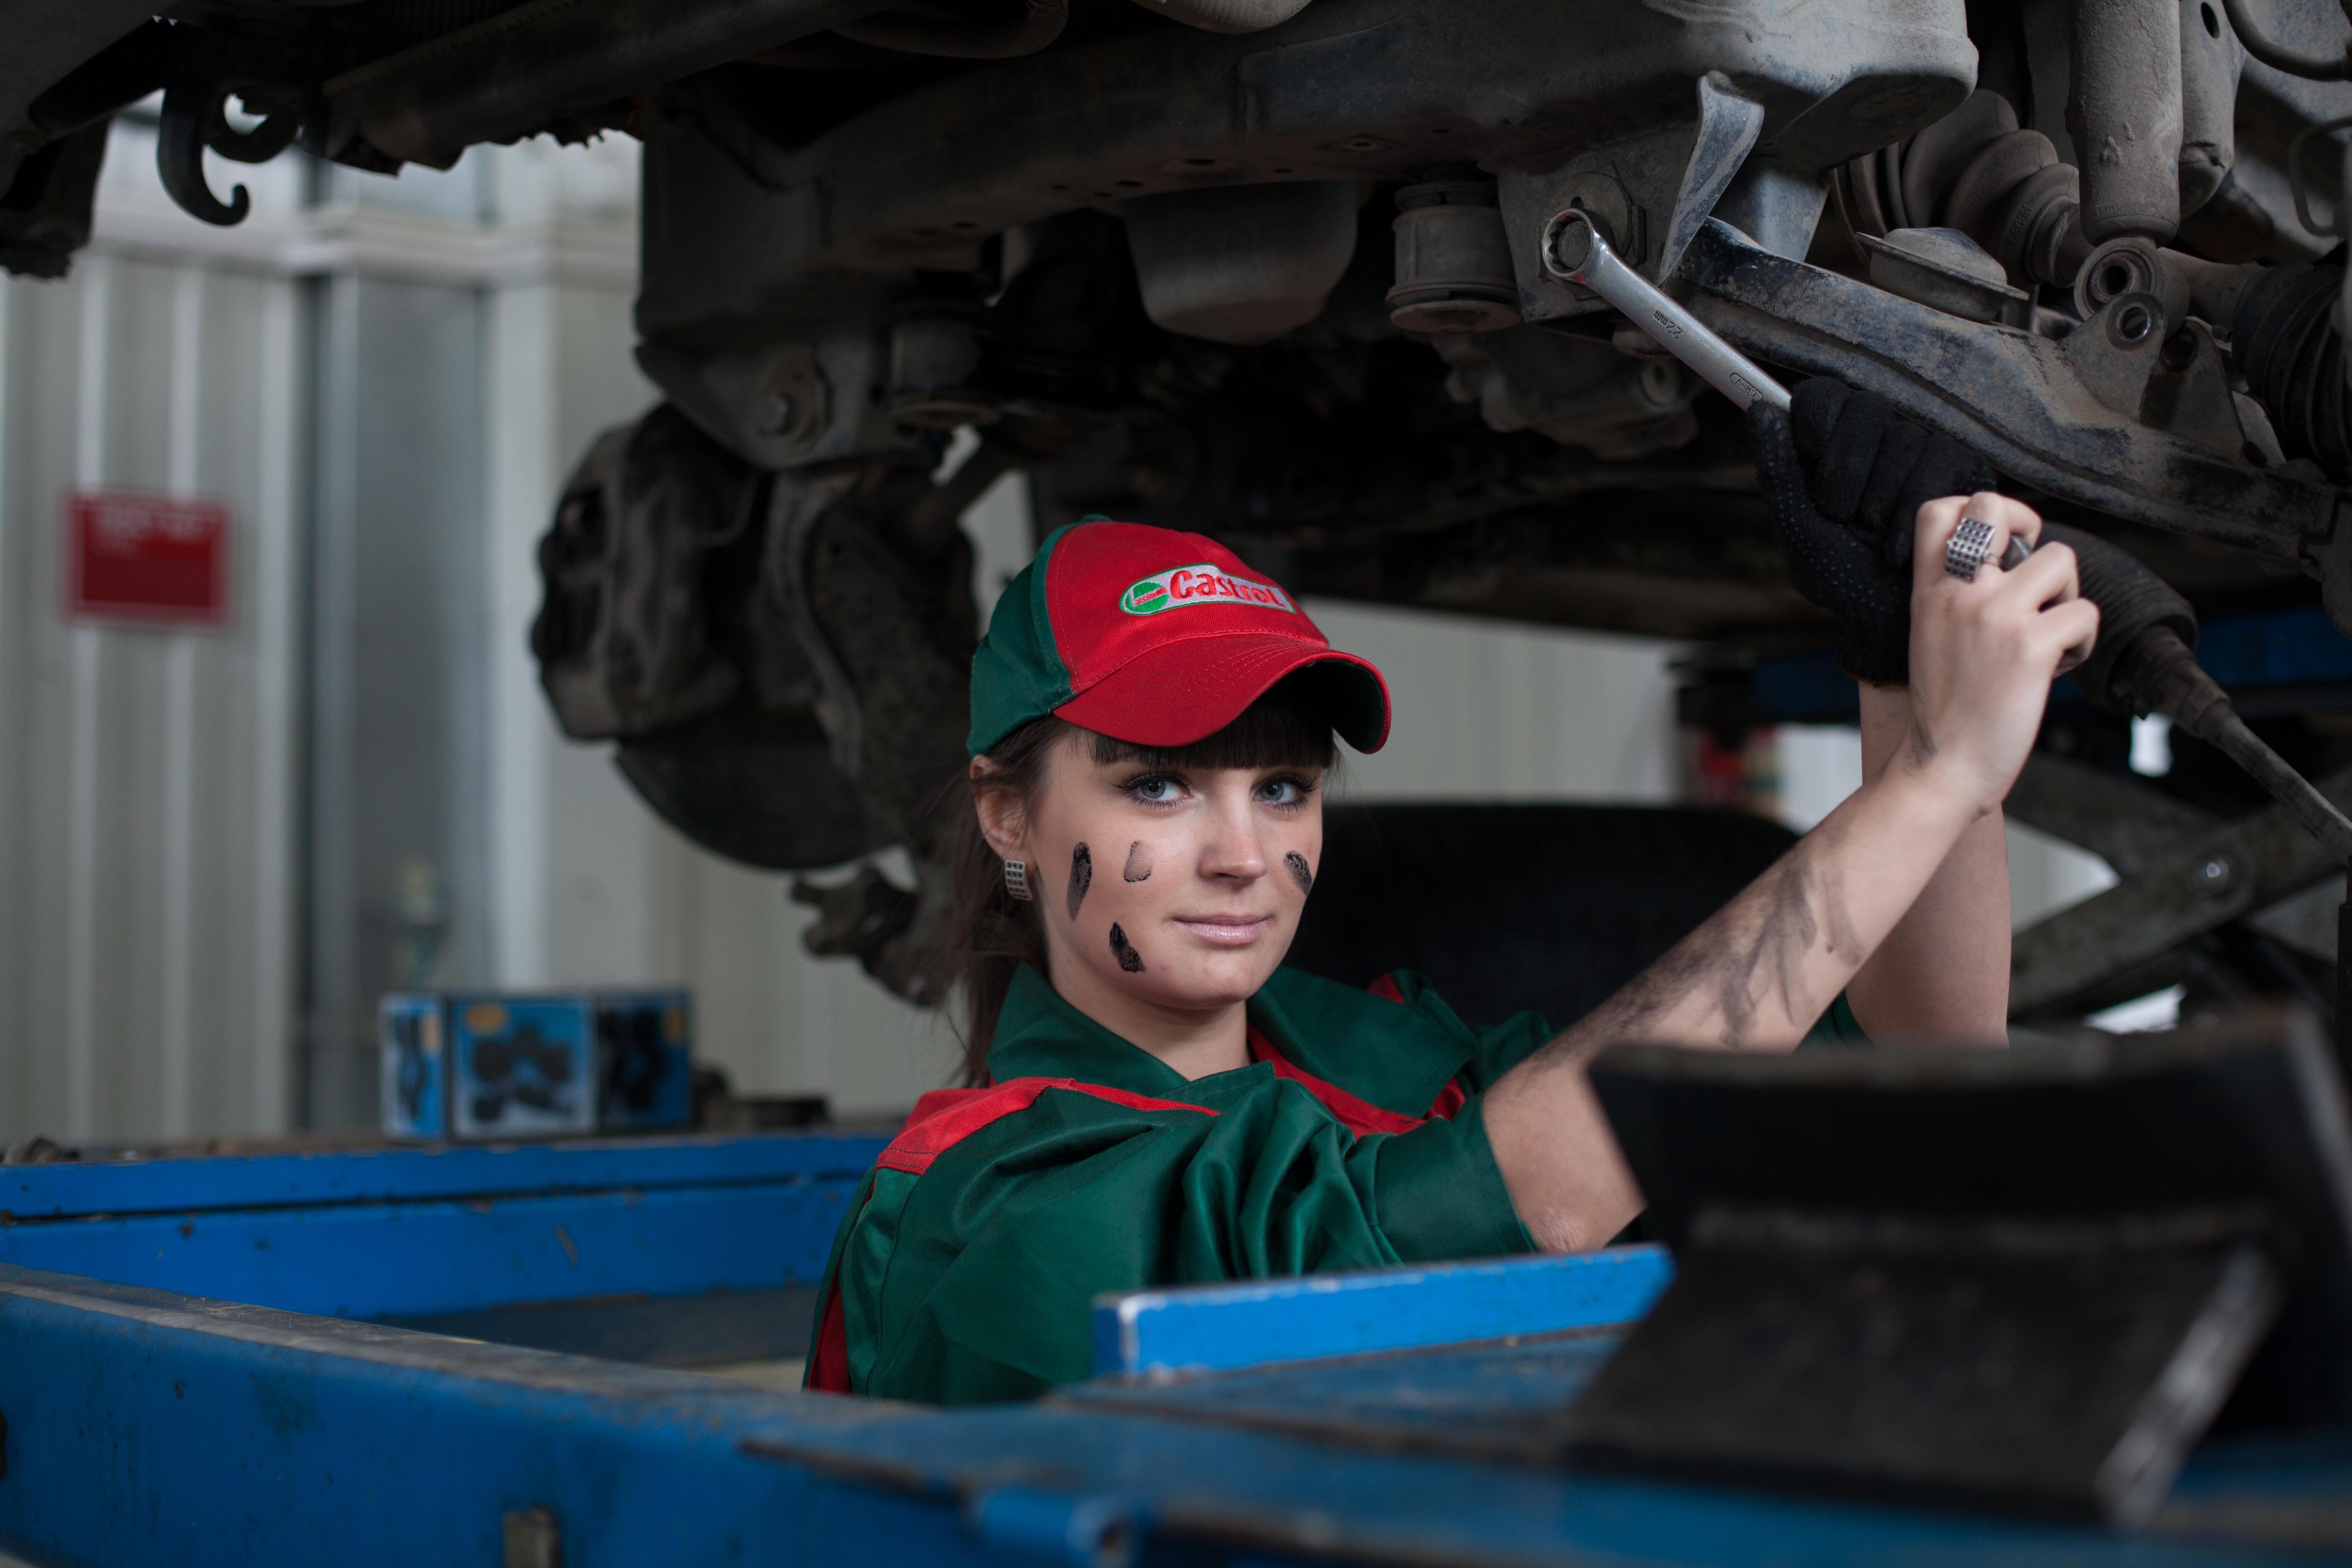 What Companies Offer Apprenticeships in the Automotive Industry?